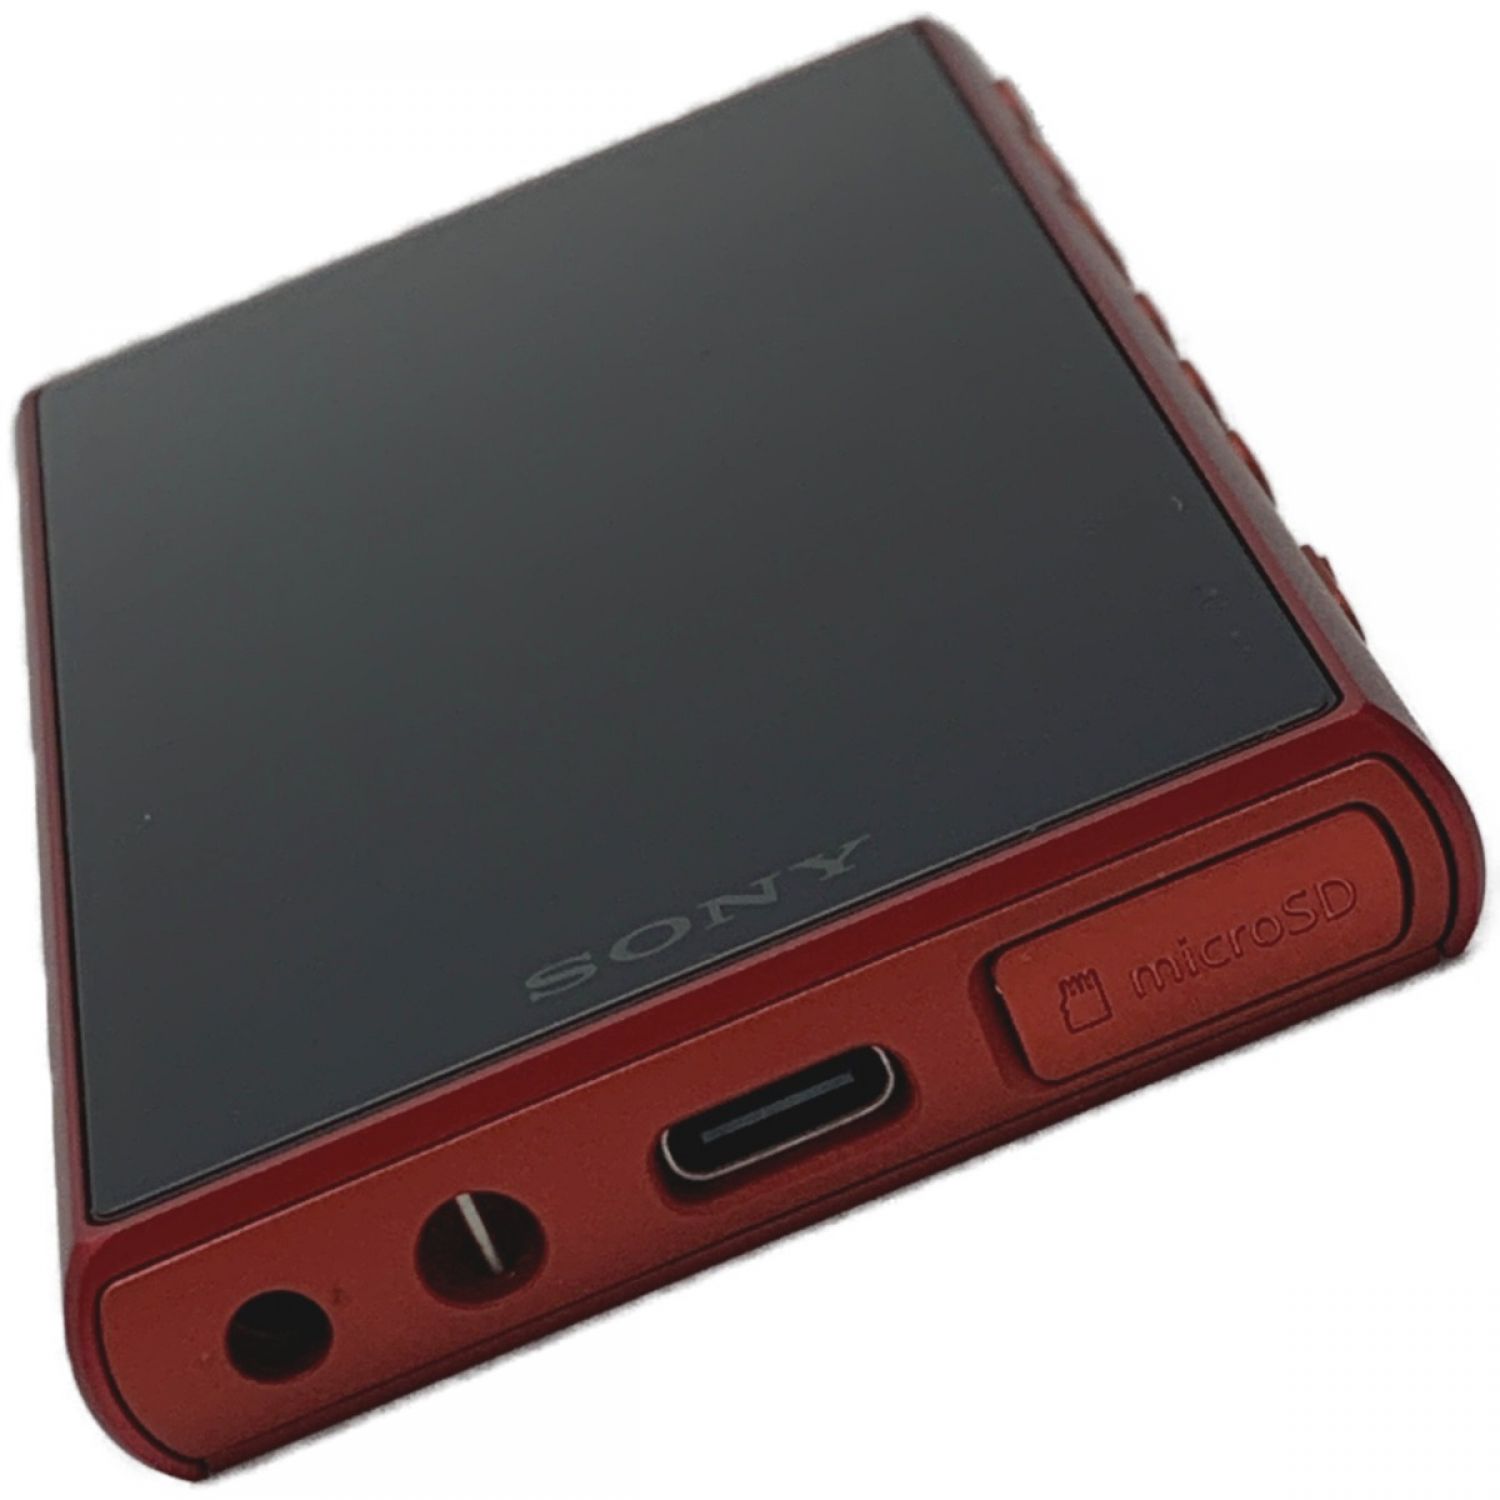 NW-A105 red 本体、ケースのみ